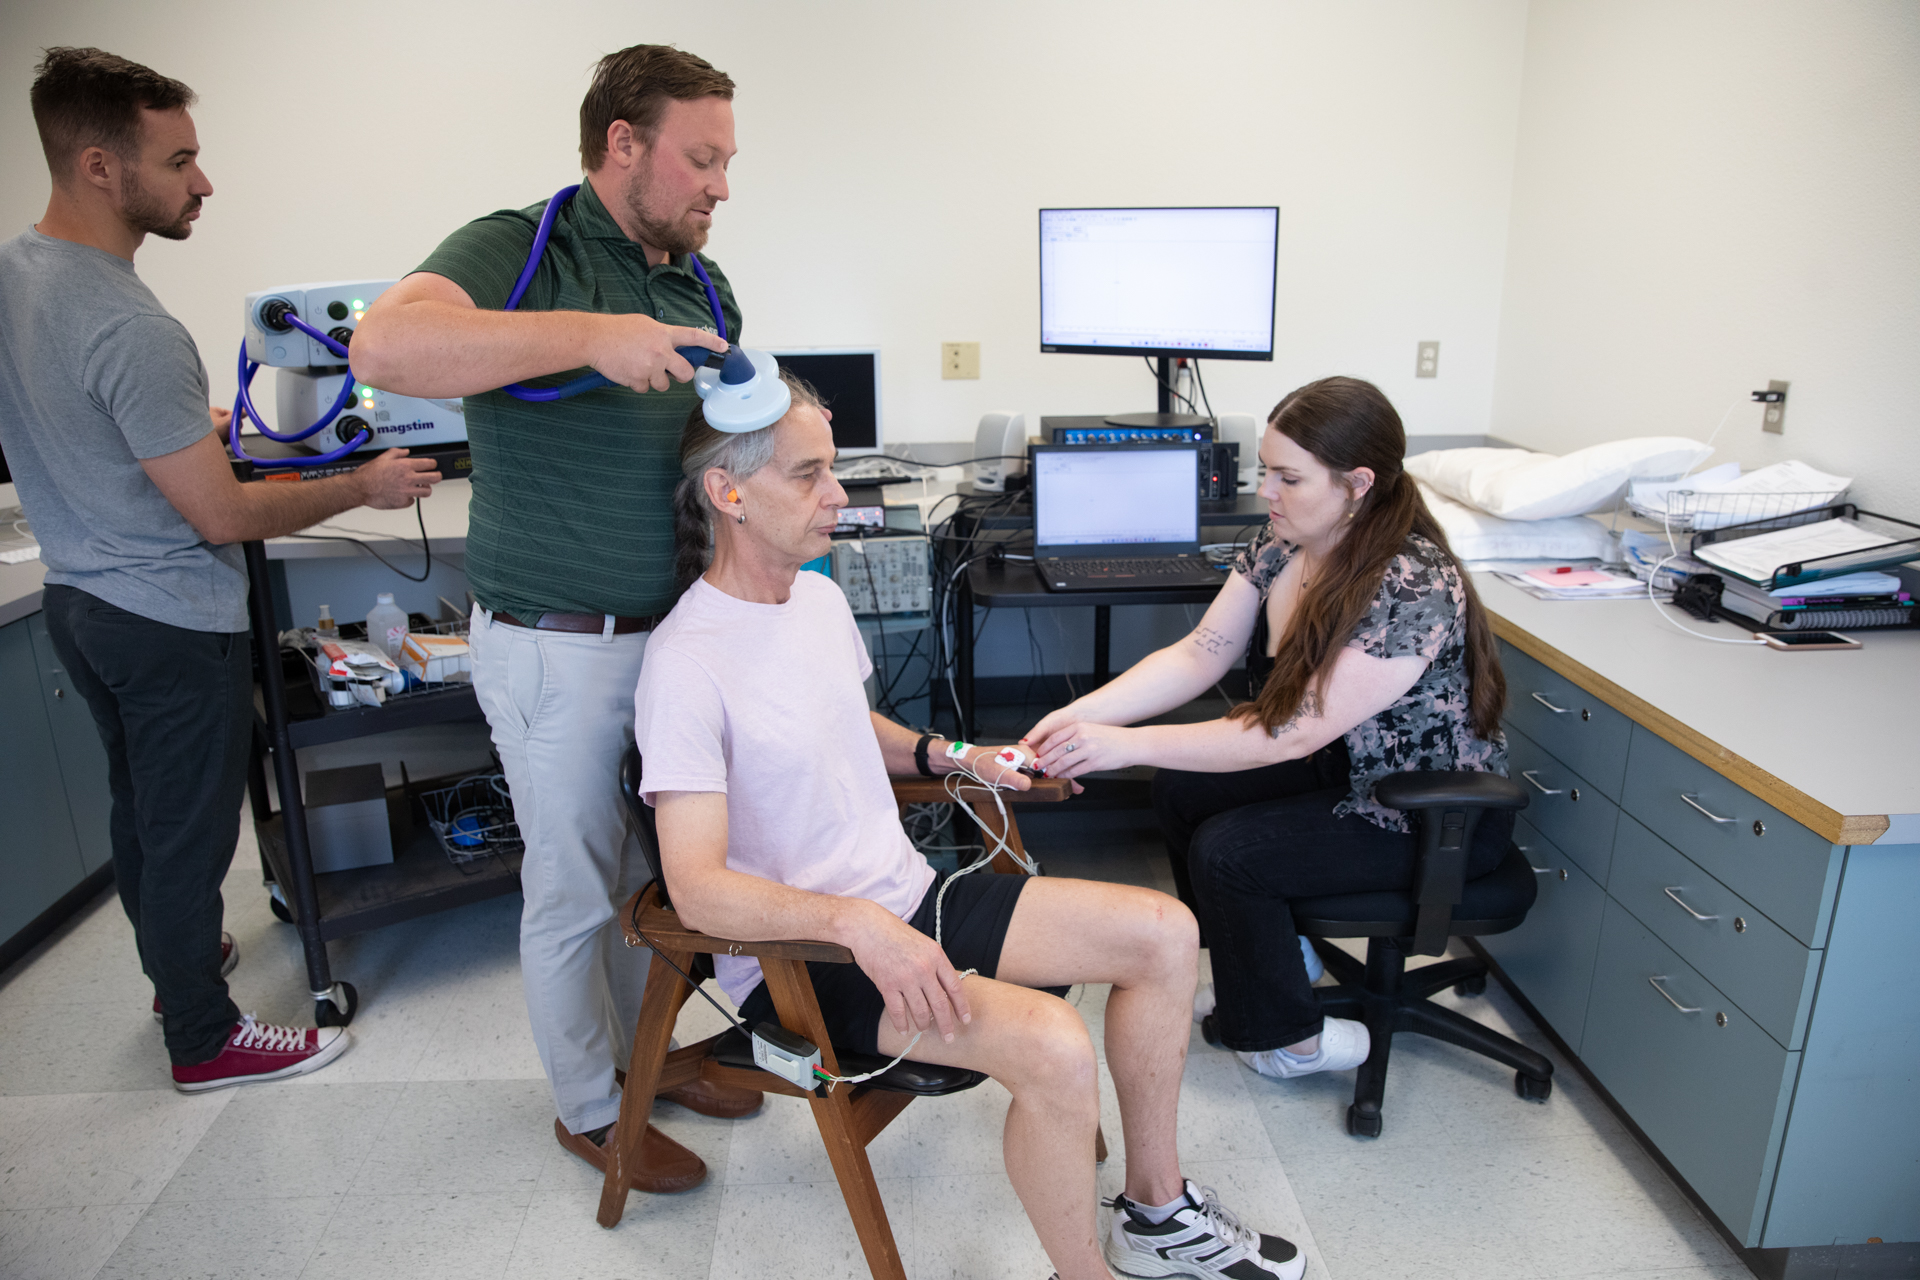 A Parkinson's patient undergoes research-related testing administered by Sac State students.